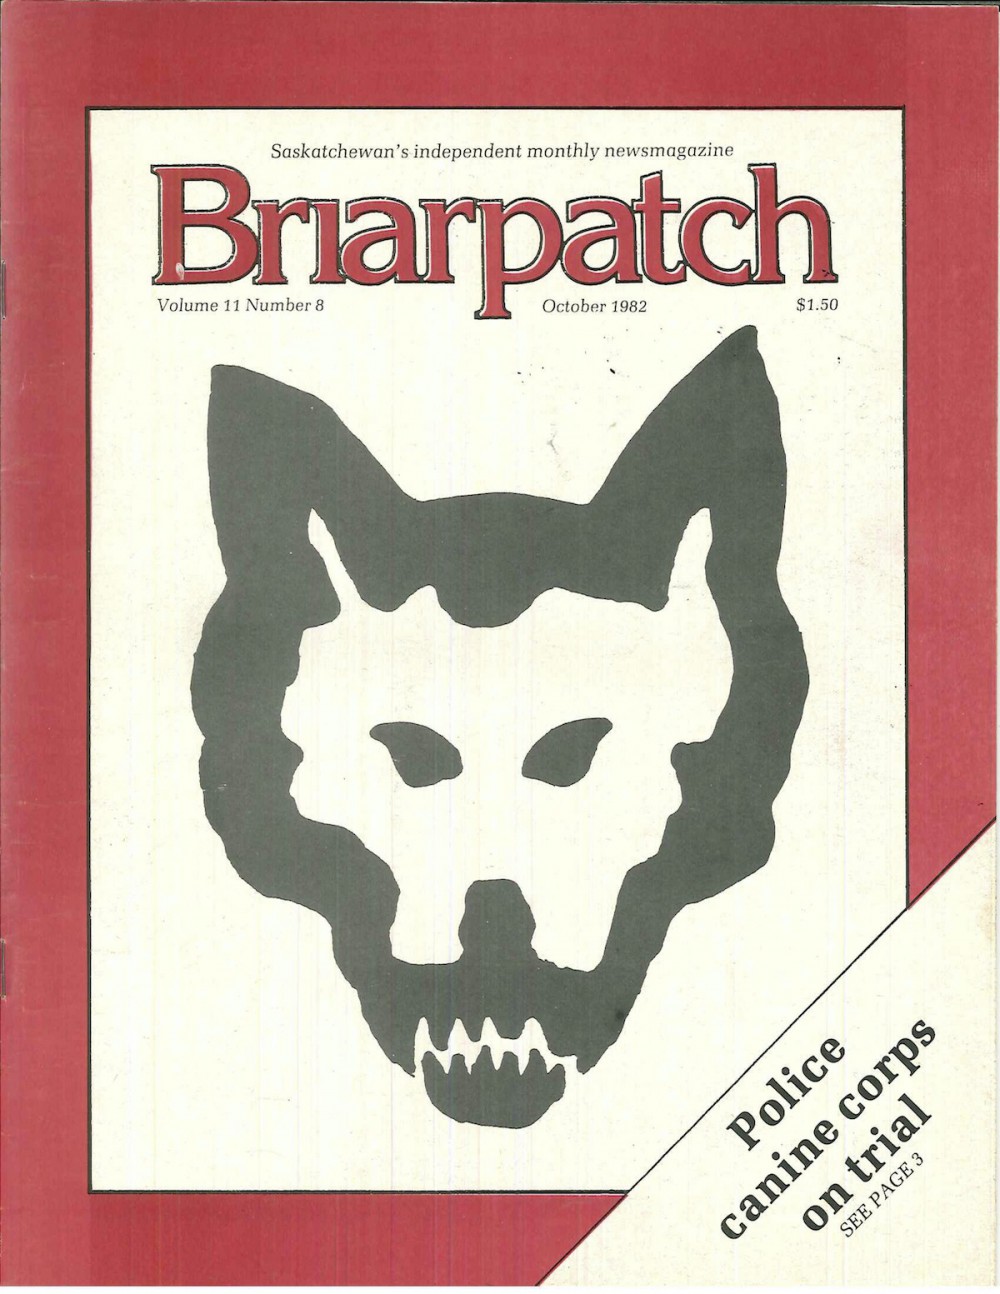 A scan of the cover of the October 1982 issue of Briarpatch. It has a rough illustration of an aggressive-looking dog with bared teeth, and the words